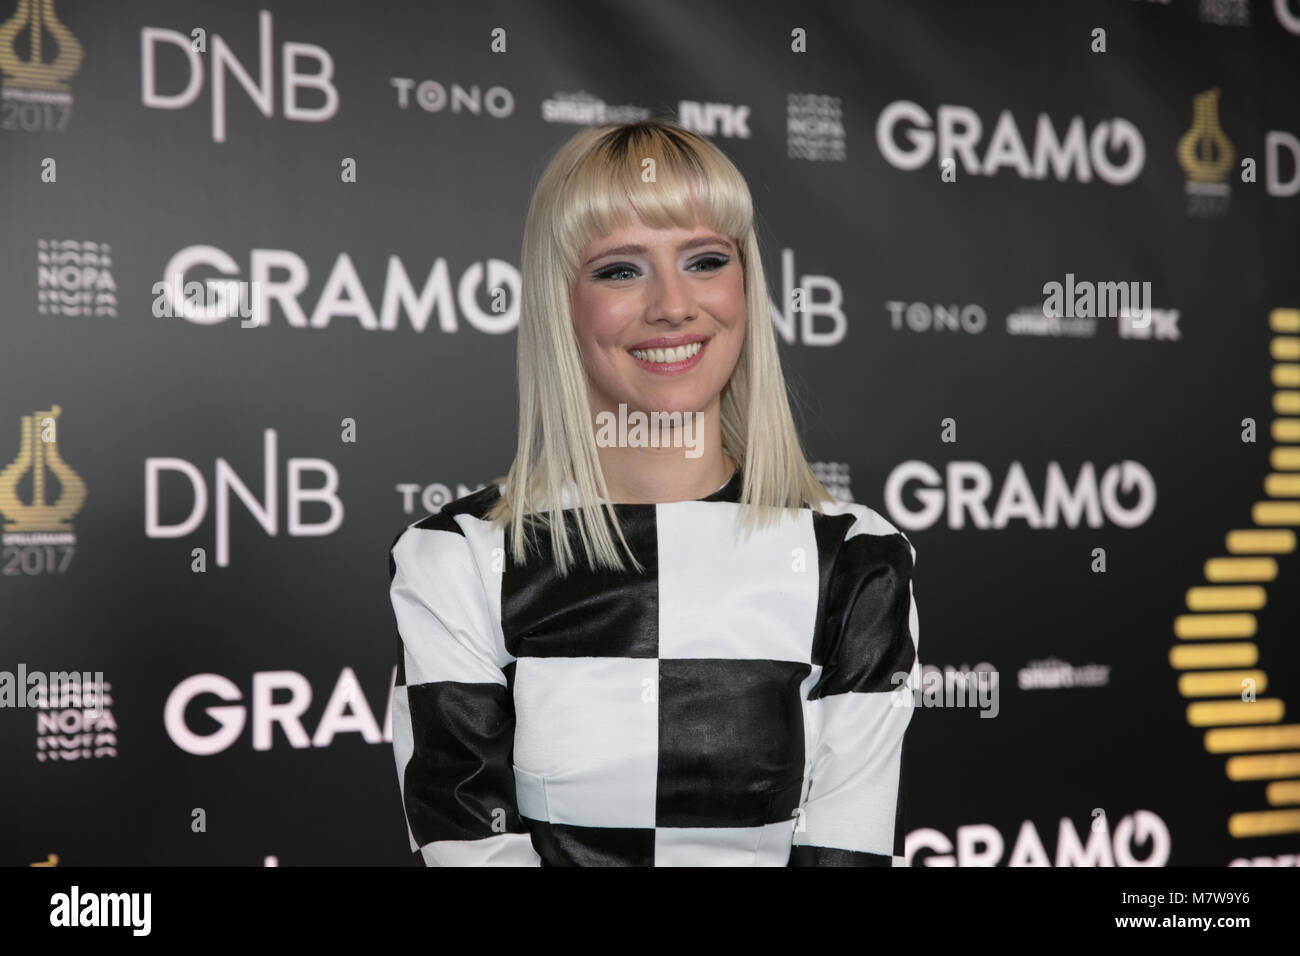 Norway, Oslo - February 25, 2018. The Norwegian pop singer Dagny seen at the red carpet at the Norwegian Grammy Awards, Spellemannprisen 2017, in Oslo. (Photo credit: Gonzales Photo - Stian S. Moller). Stock Photo